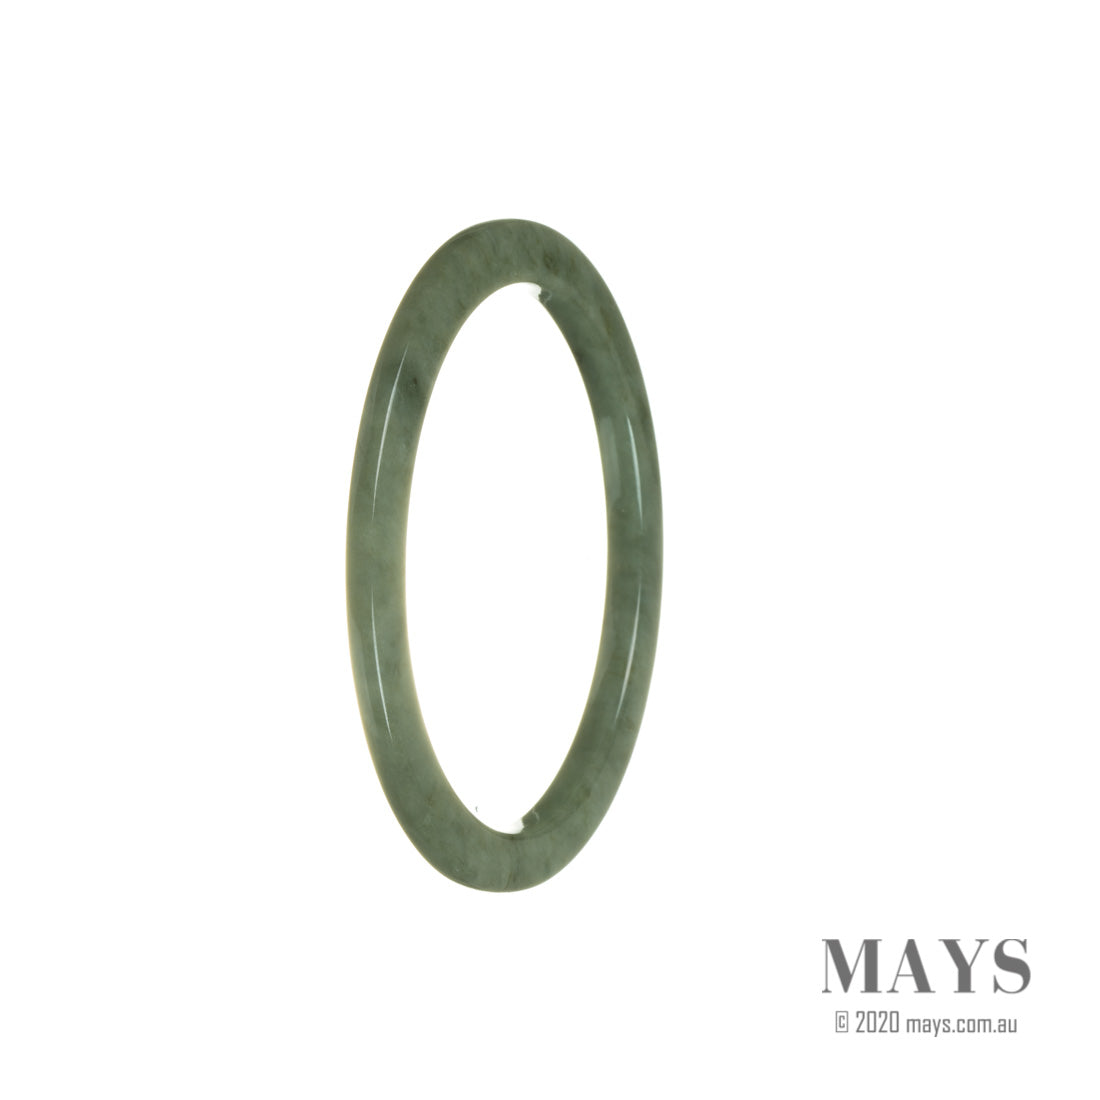 A close-up image of a delicate, thin green jadeite bracelet. The bracelet is made of genuine, untreated jadeite, showcasing its natural beauty. The jadeite beads are polished and smooth, reflecting light with a vibrant green hue. The bracelet has a 56mm circumference, making it a dainty and elegant accessory. It is a MAYS product, known for their high-quality jadeite jewelry.